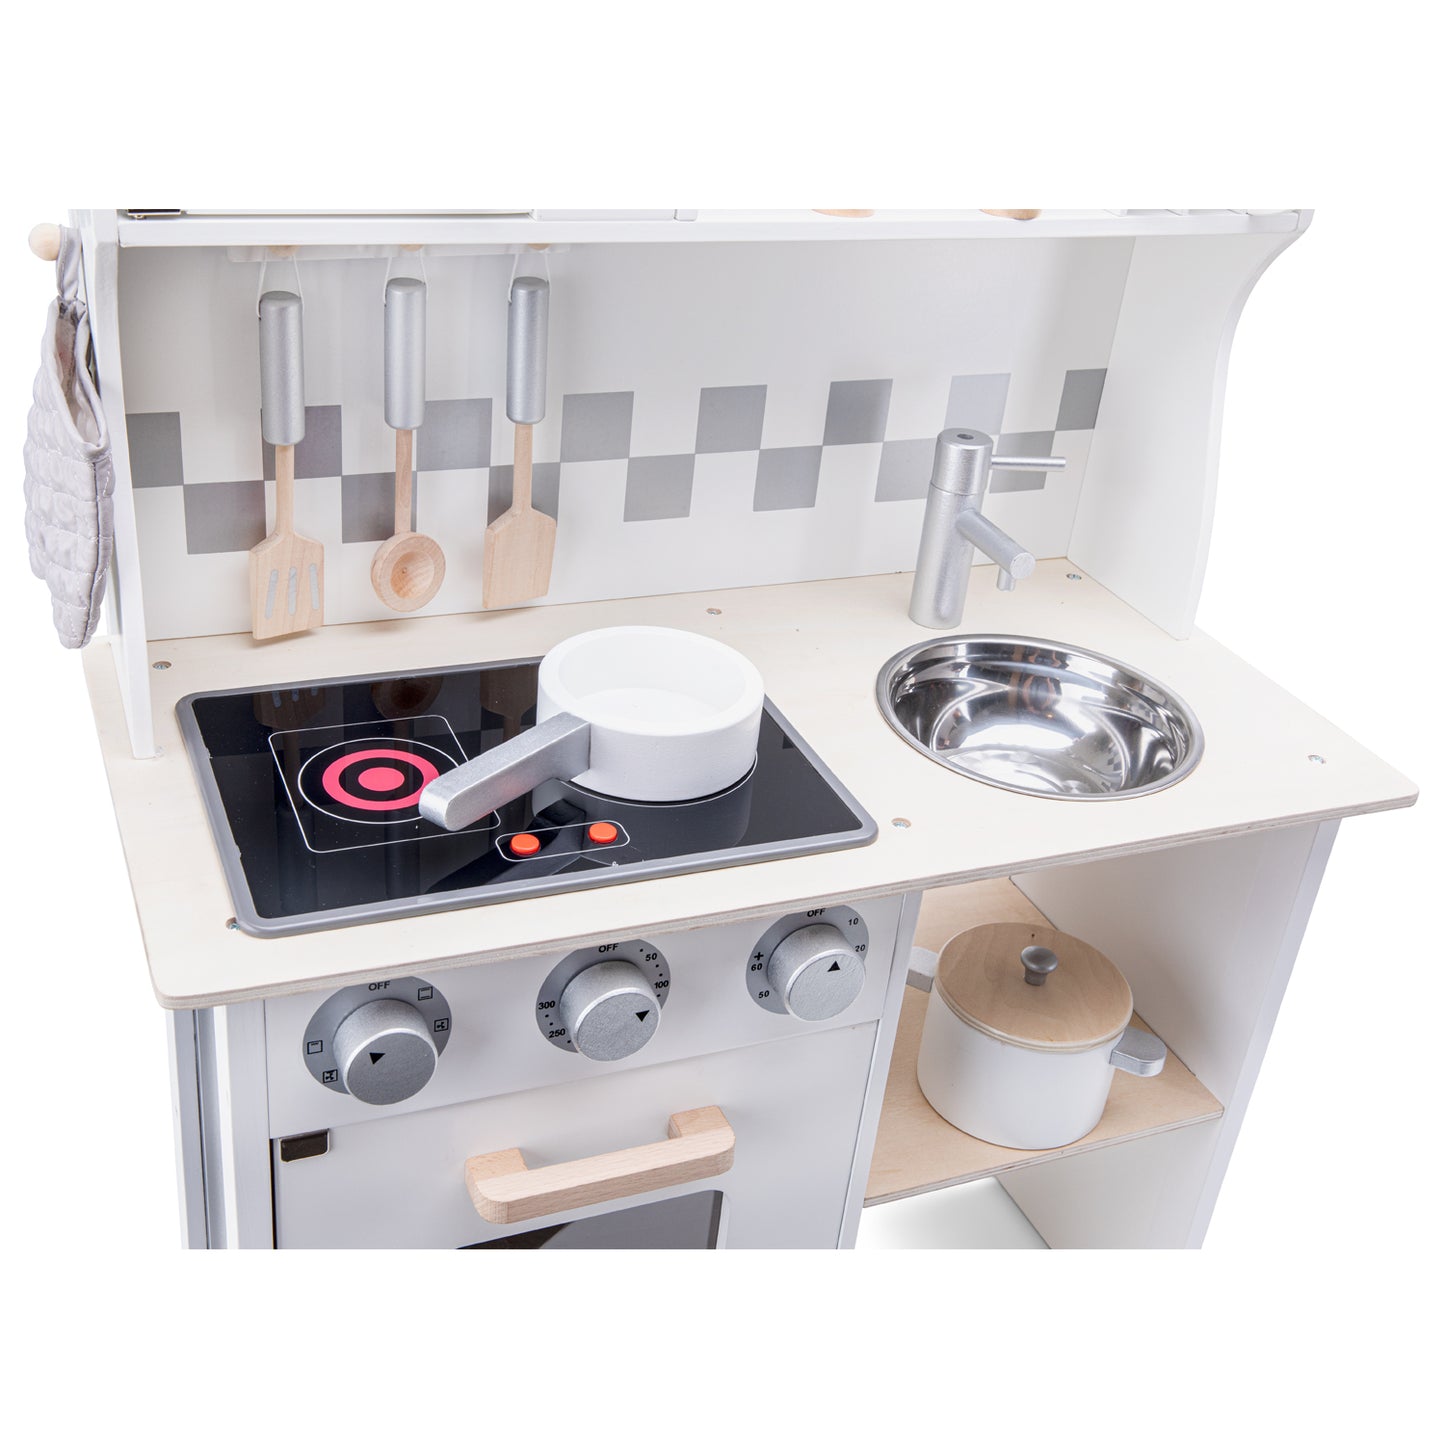 New Classic Toys Kitchenette Modern Electric Cooking, White